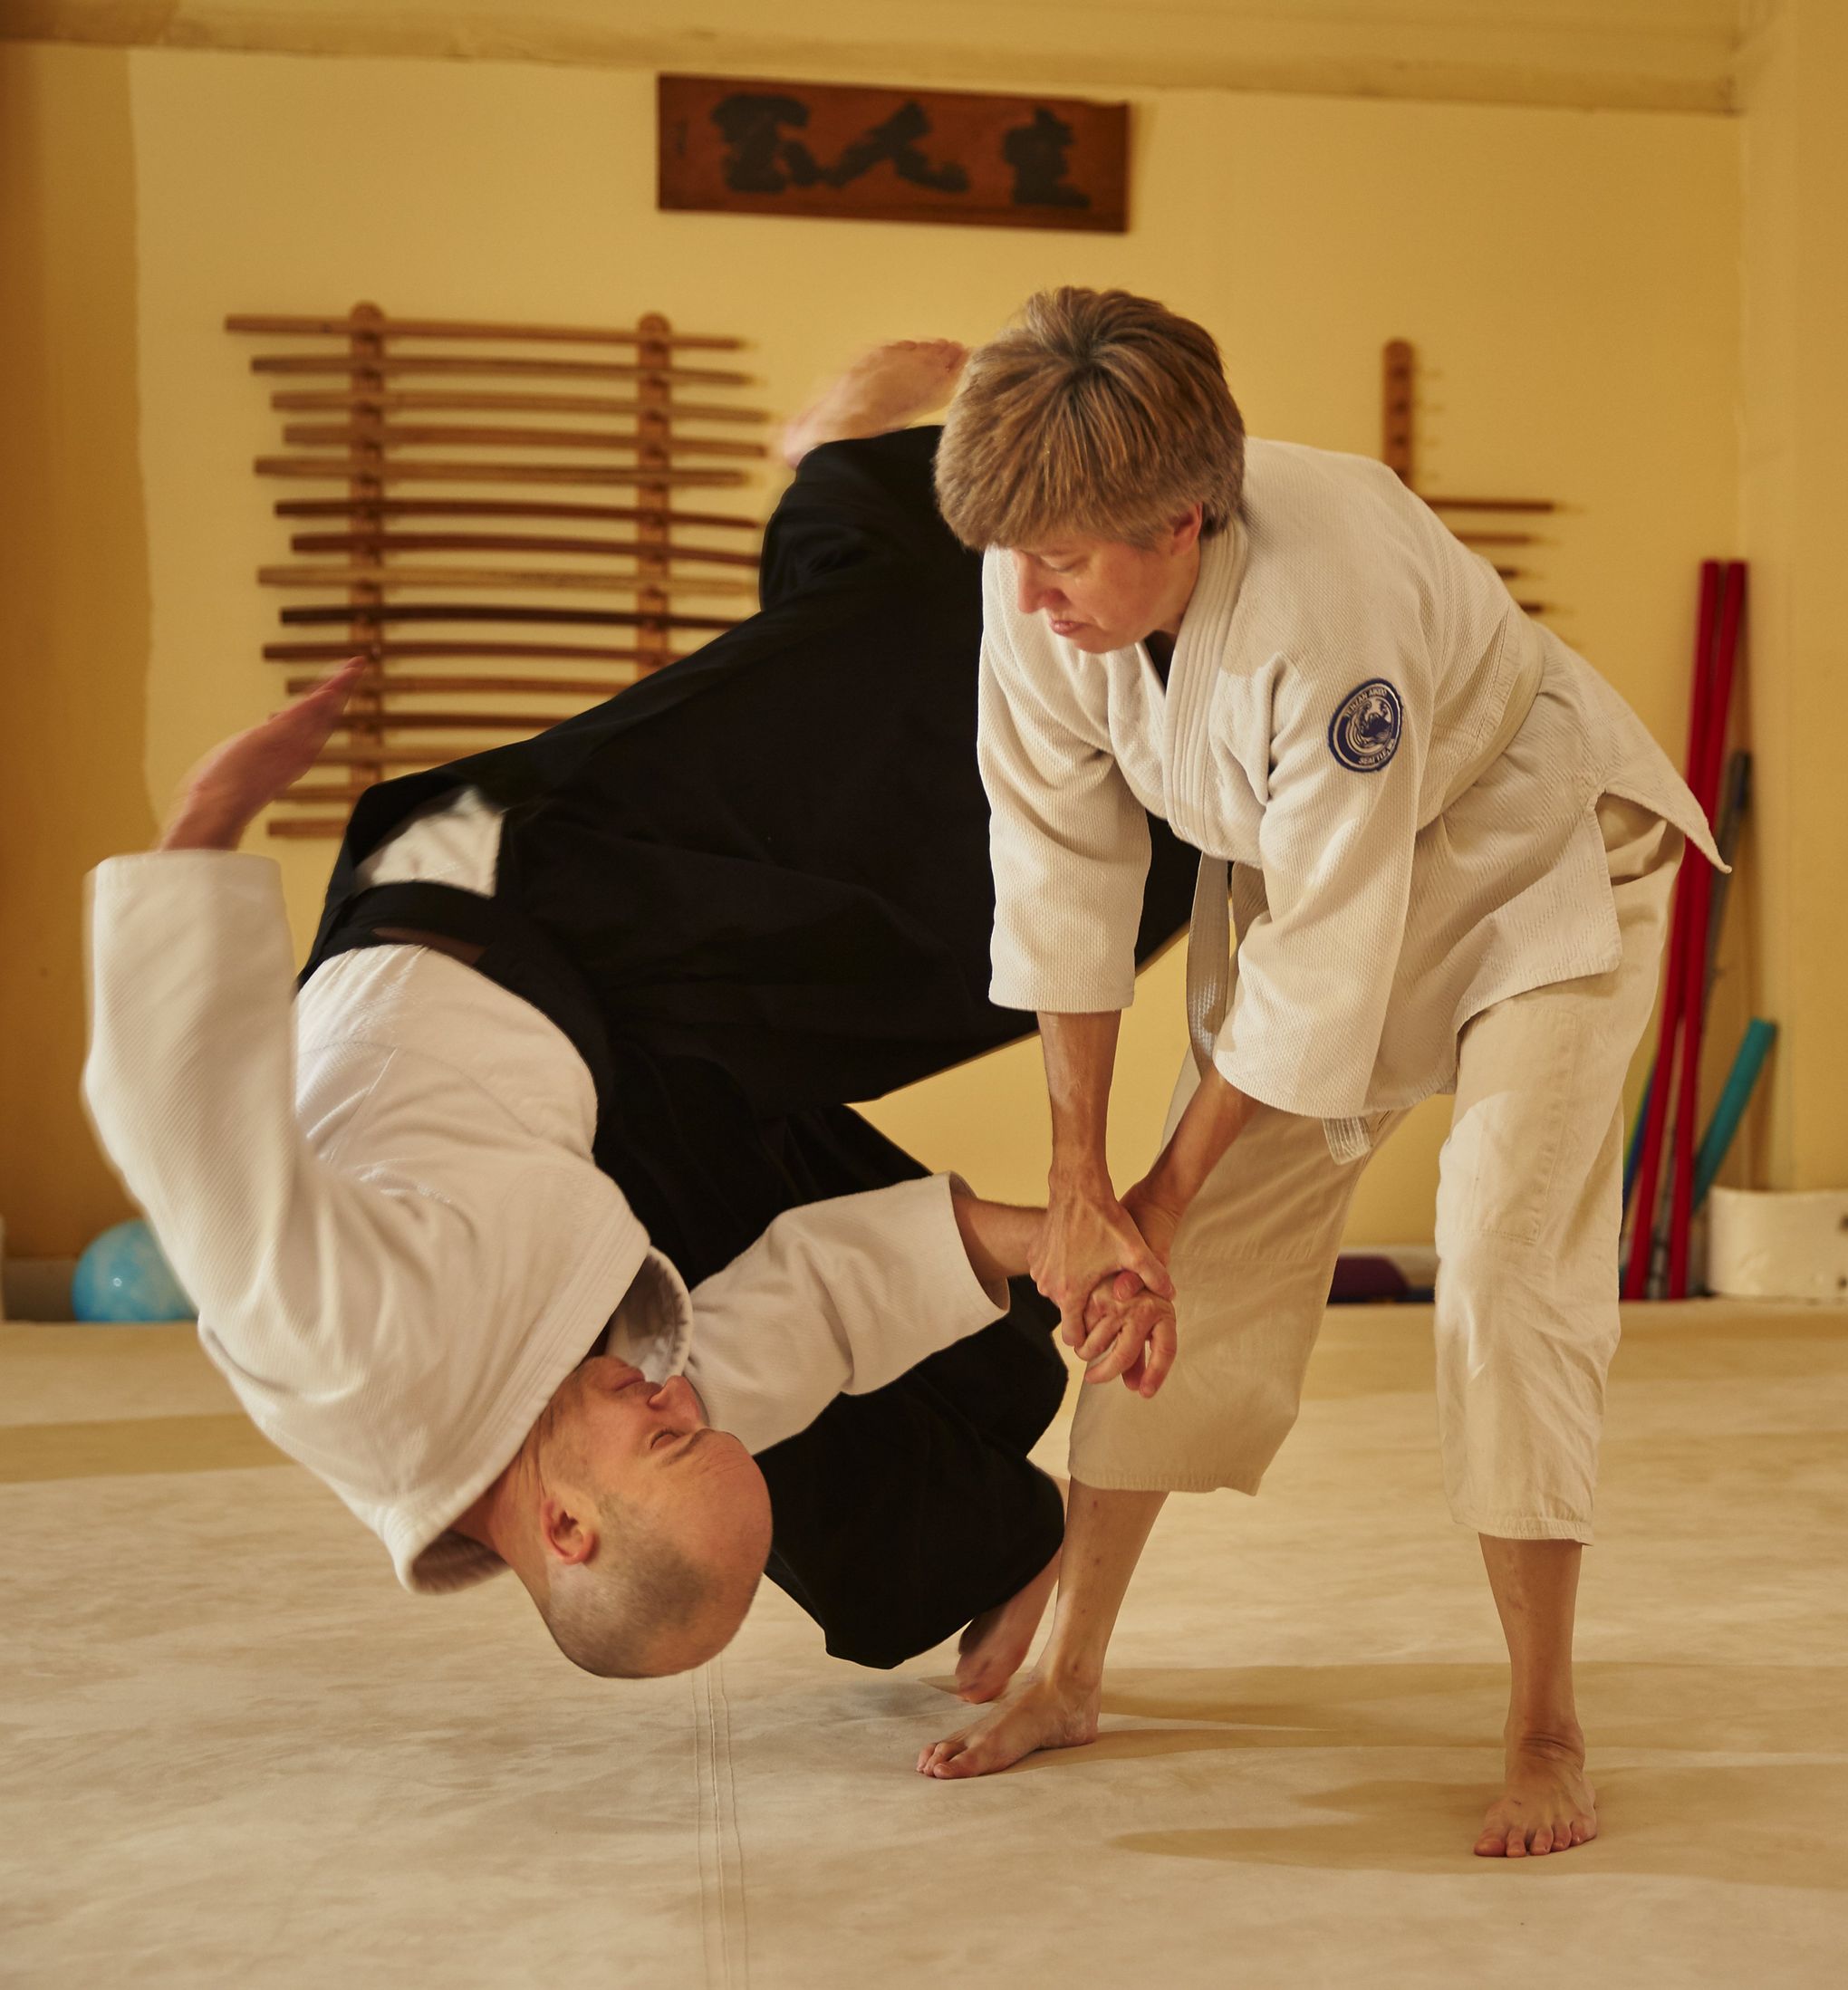 aikido-teaches-self-defense-through-philosophy-and-fitness-the